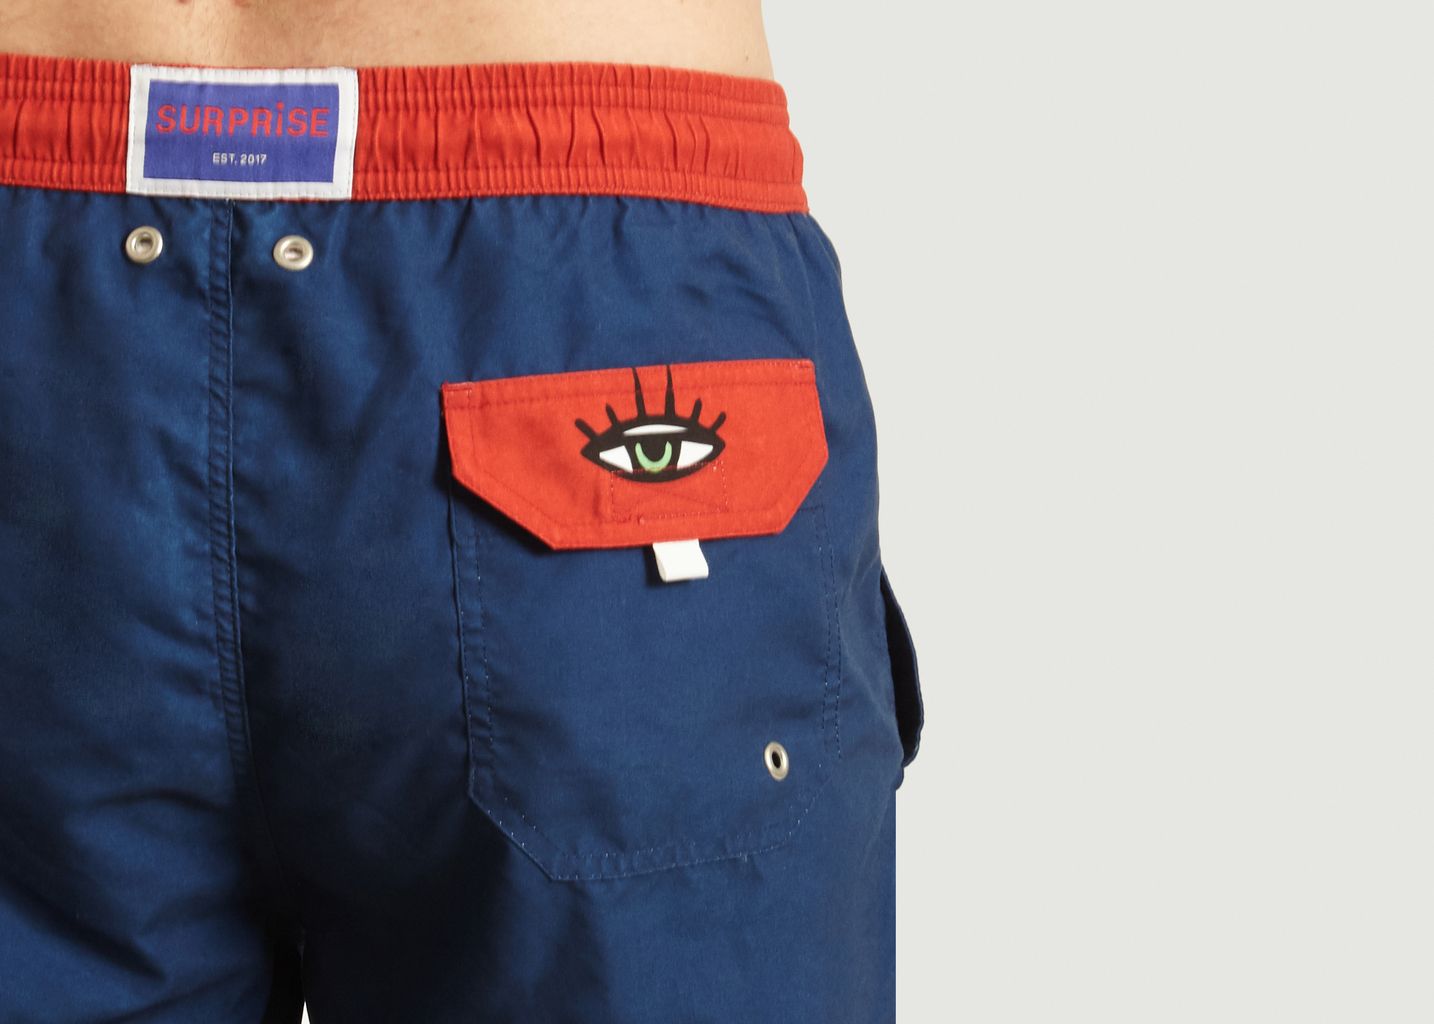 Frenchy swimming trunks - Surprise